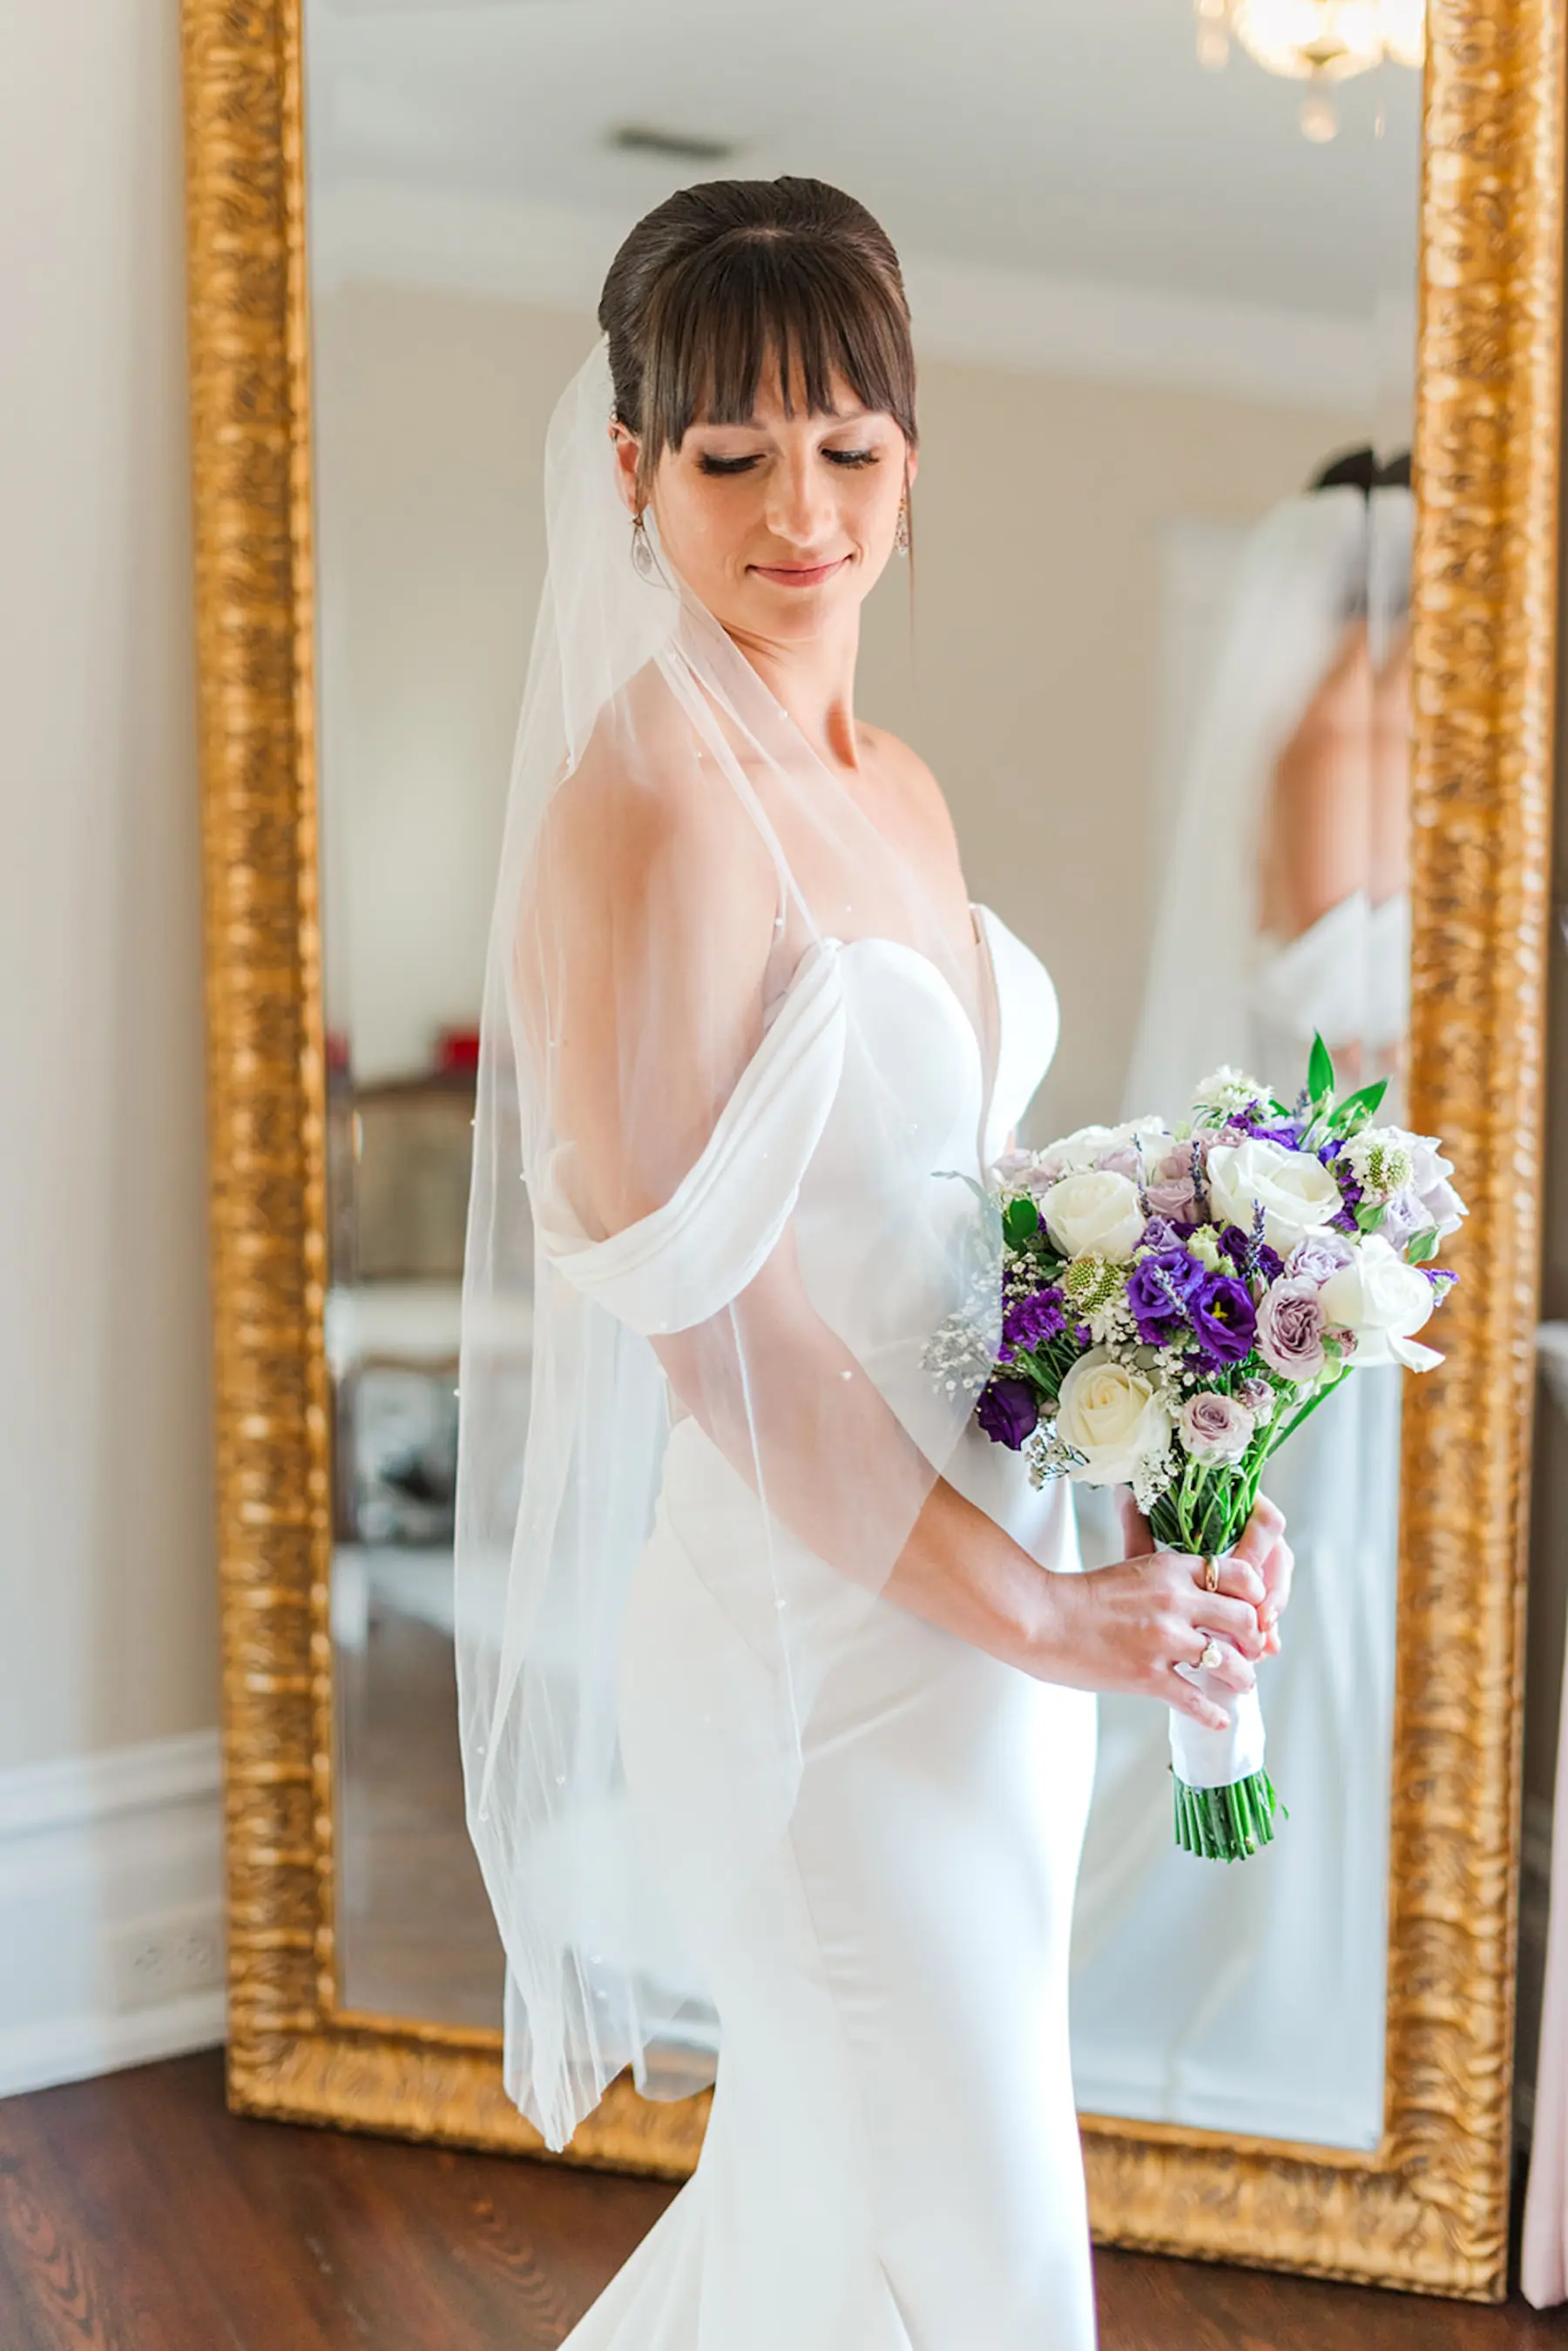 Elegant Sweetheart Wedding Dress with Straps with Veil Ideas | Purple Spring Floral Bouquet | South Tampa Photographer Eddy Almaguer Photography 